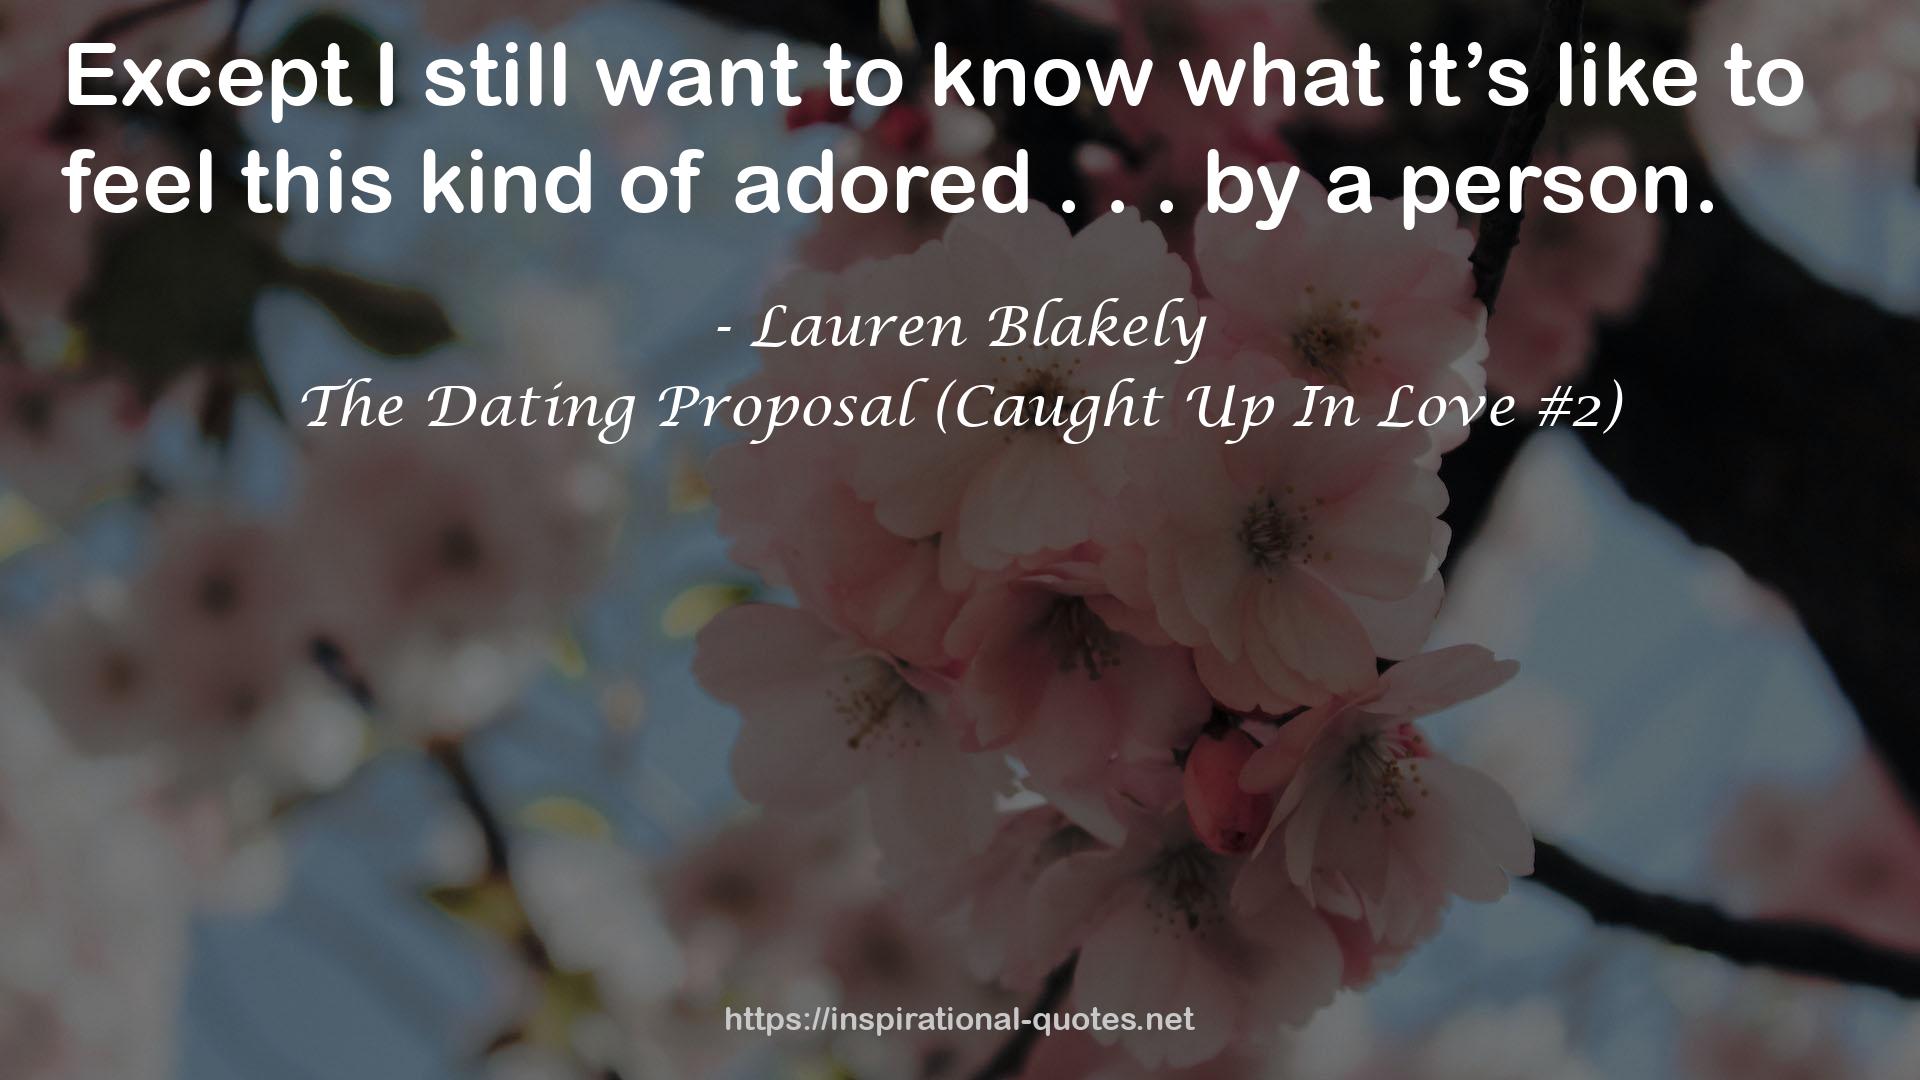 The Dating Proposal (Caught Up In Love #2) QUOTES